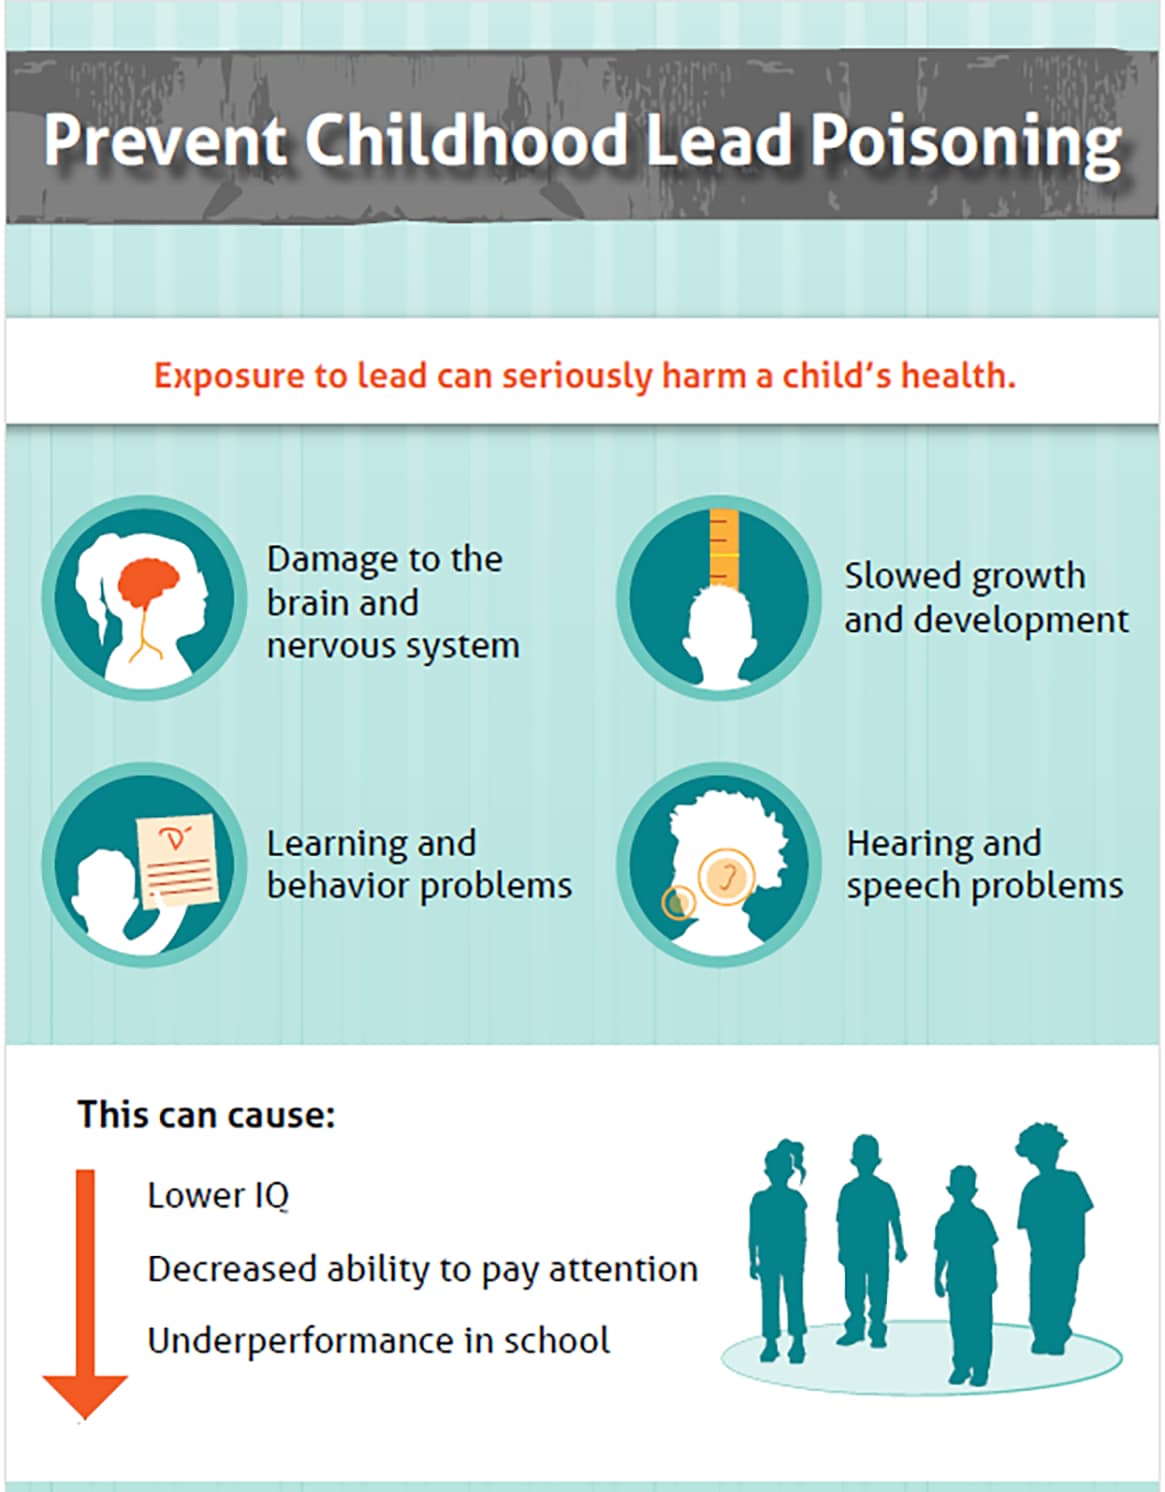 Prevent childhood lead poisoning. Exposure to lead can seriously harm a child's health.